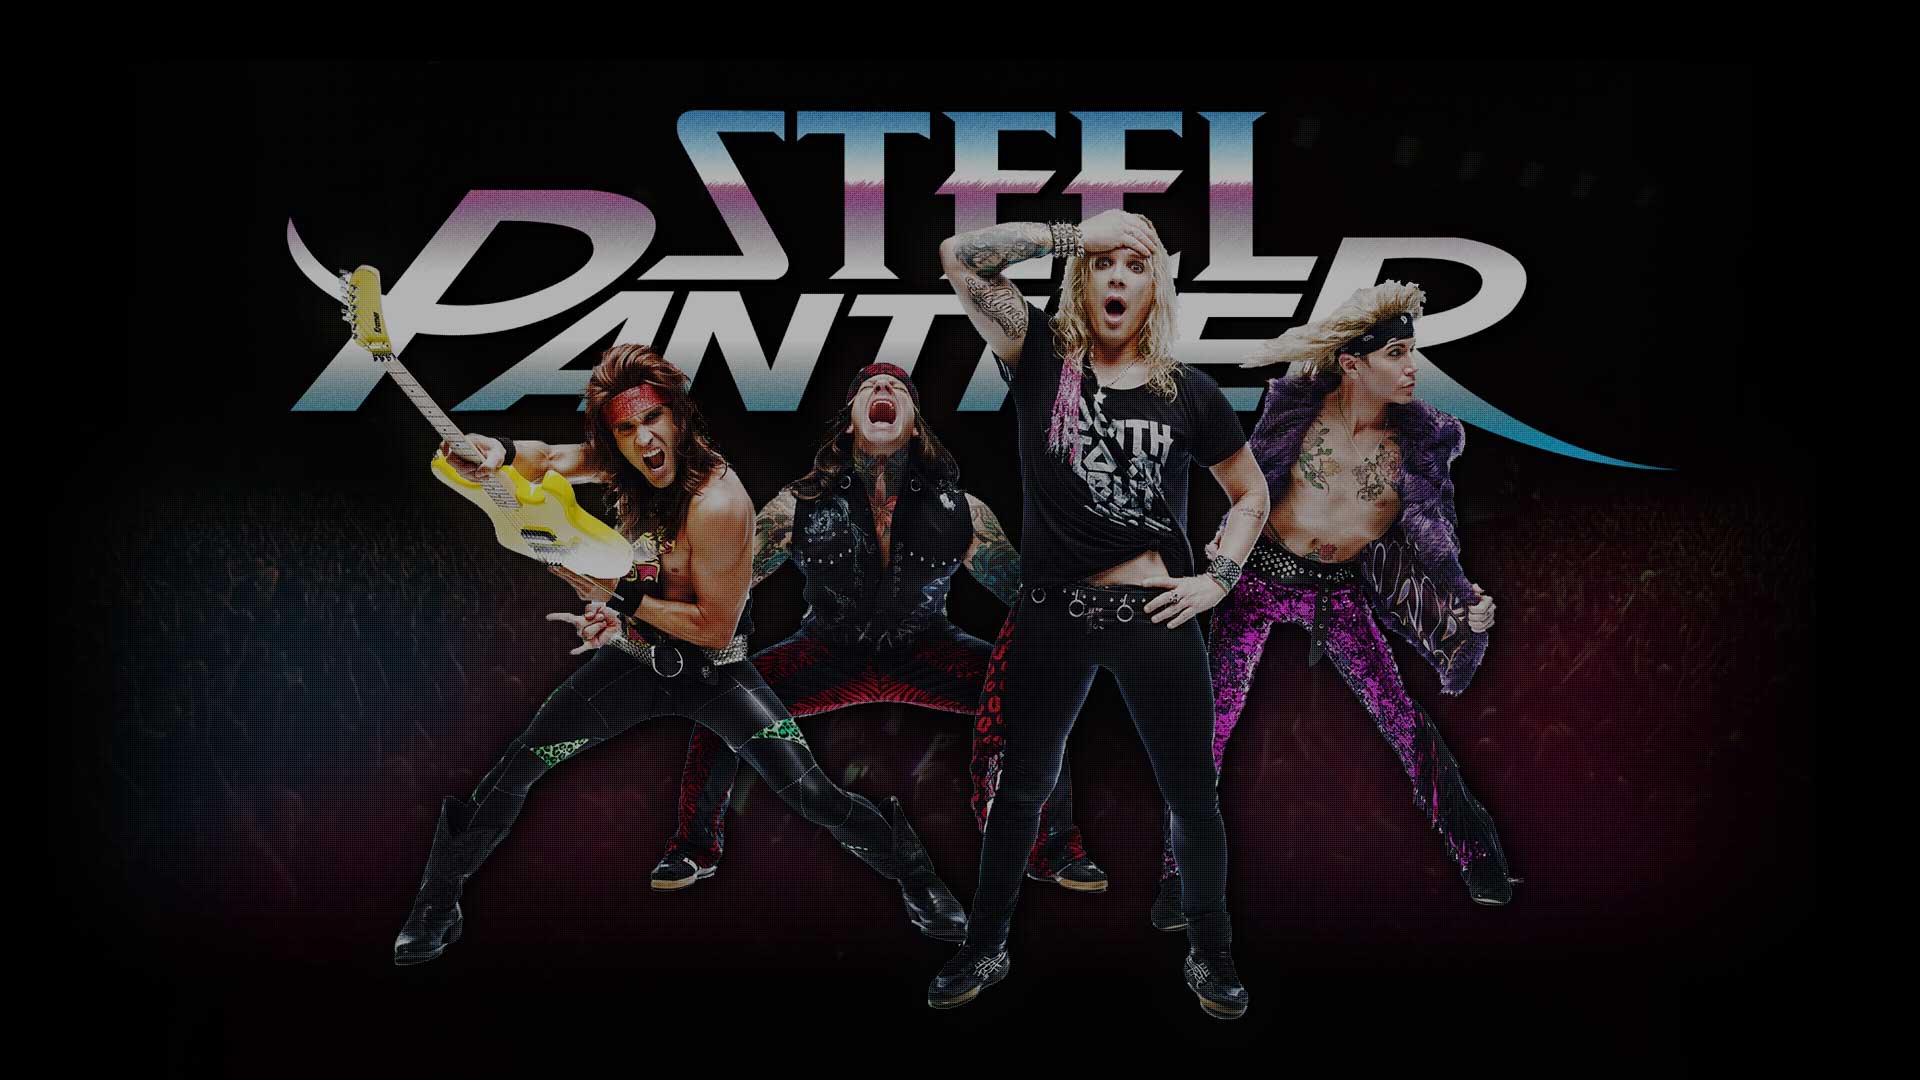 1920x1080px Steel Panther 157.79 KB